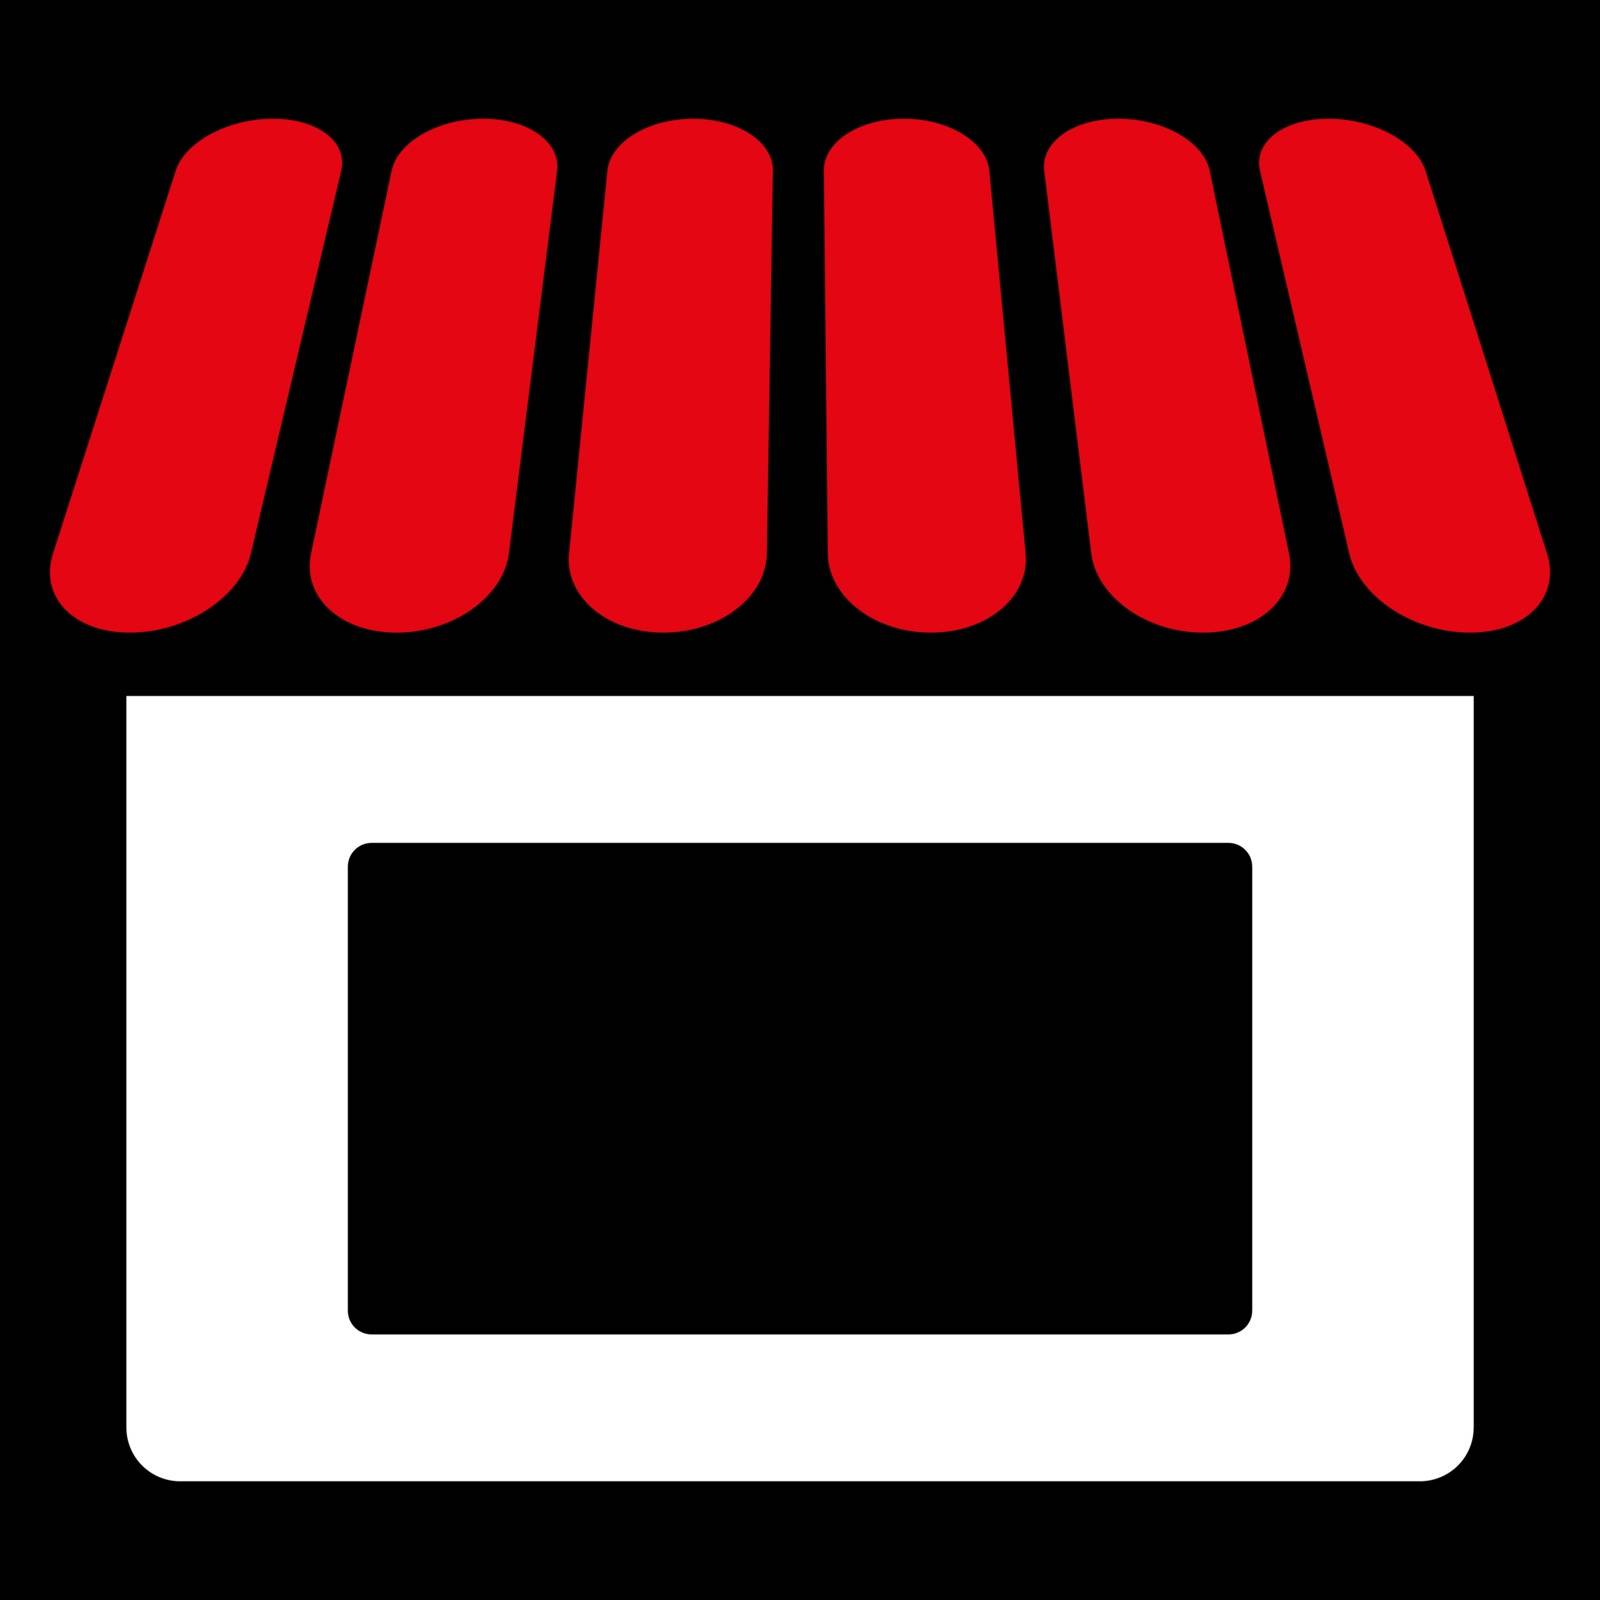 Shop icon. This flat vector symbol uses red and white colors, rounded angles, and isolated on a black background.